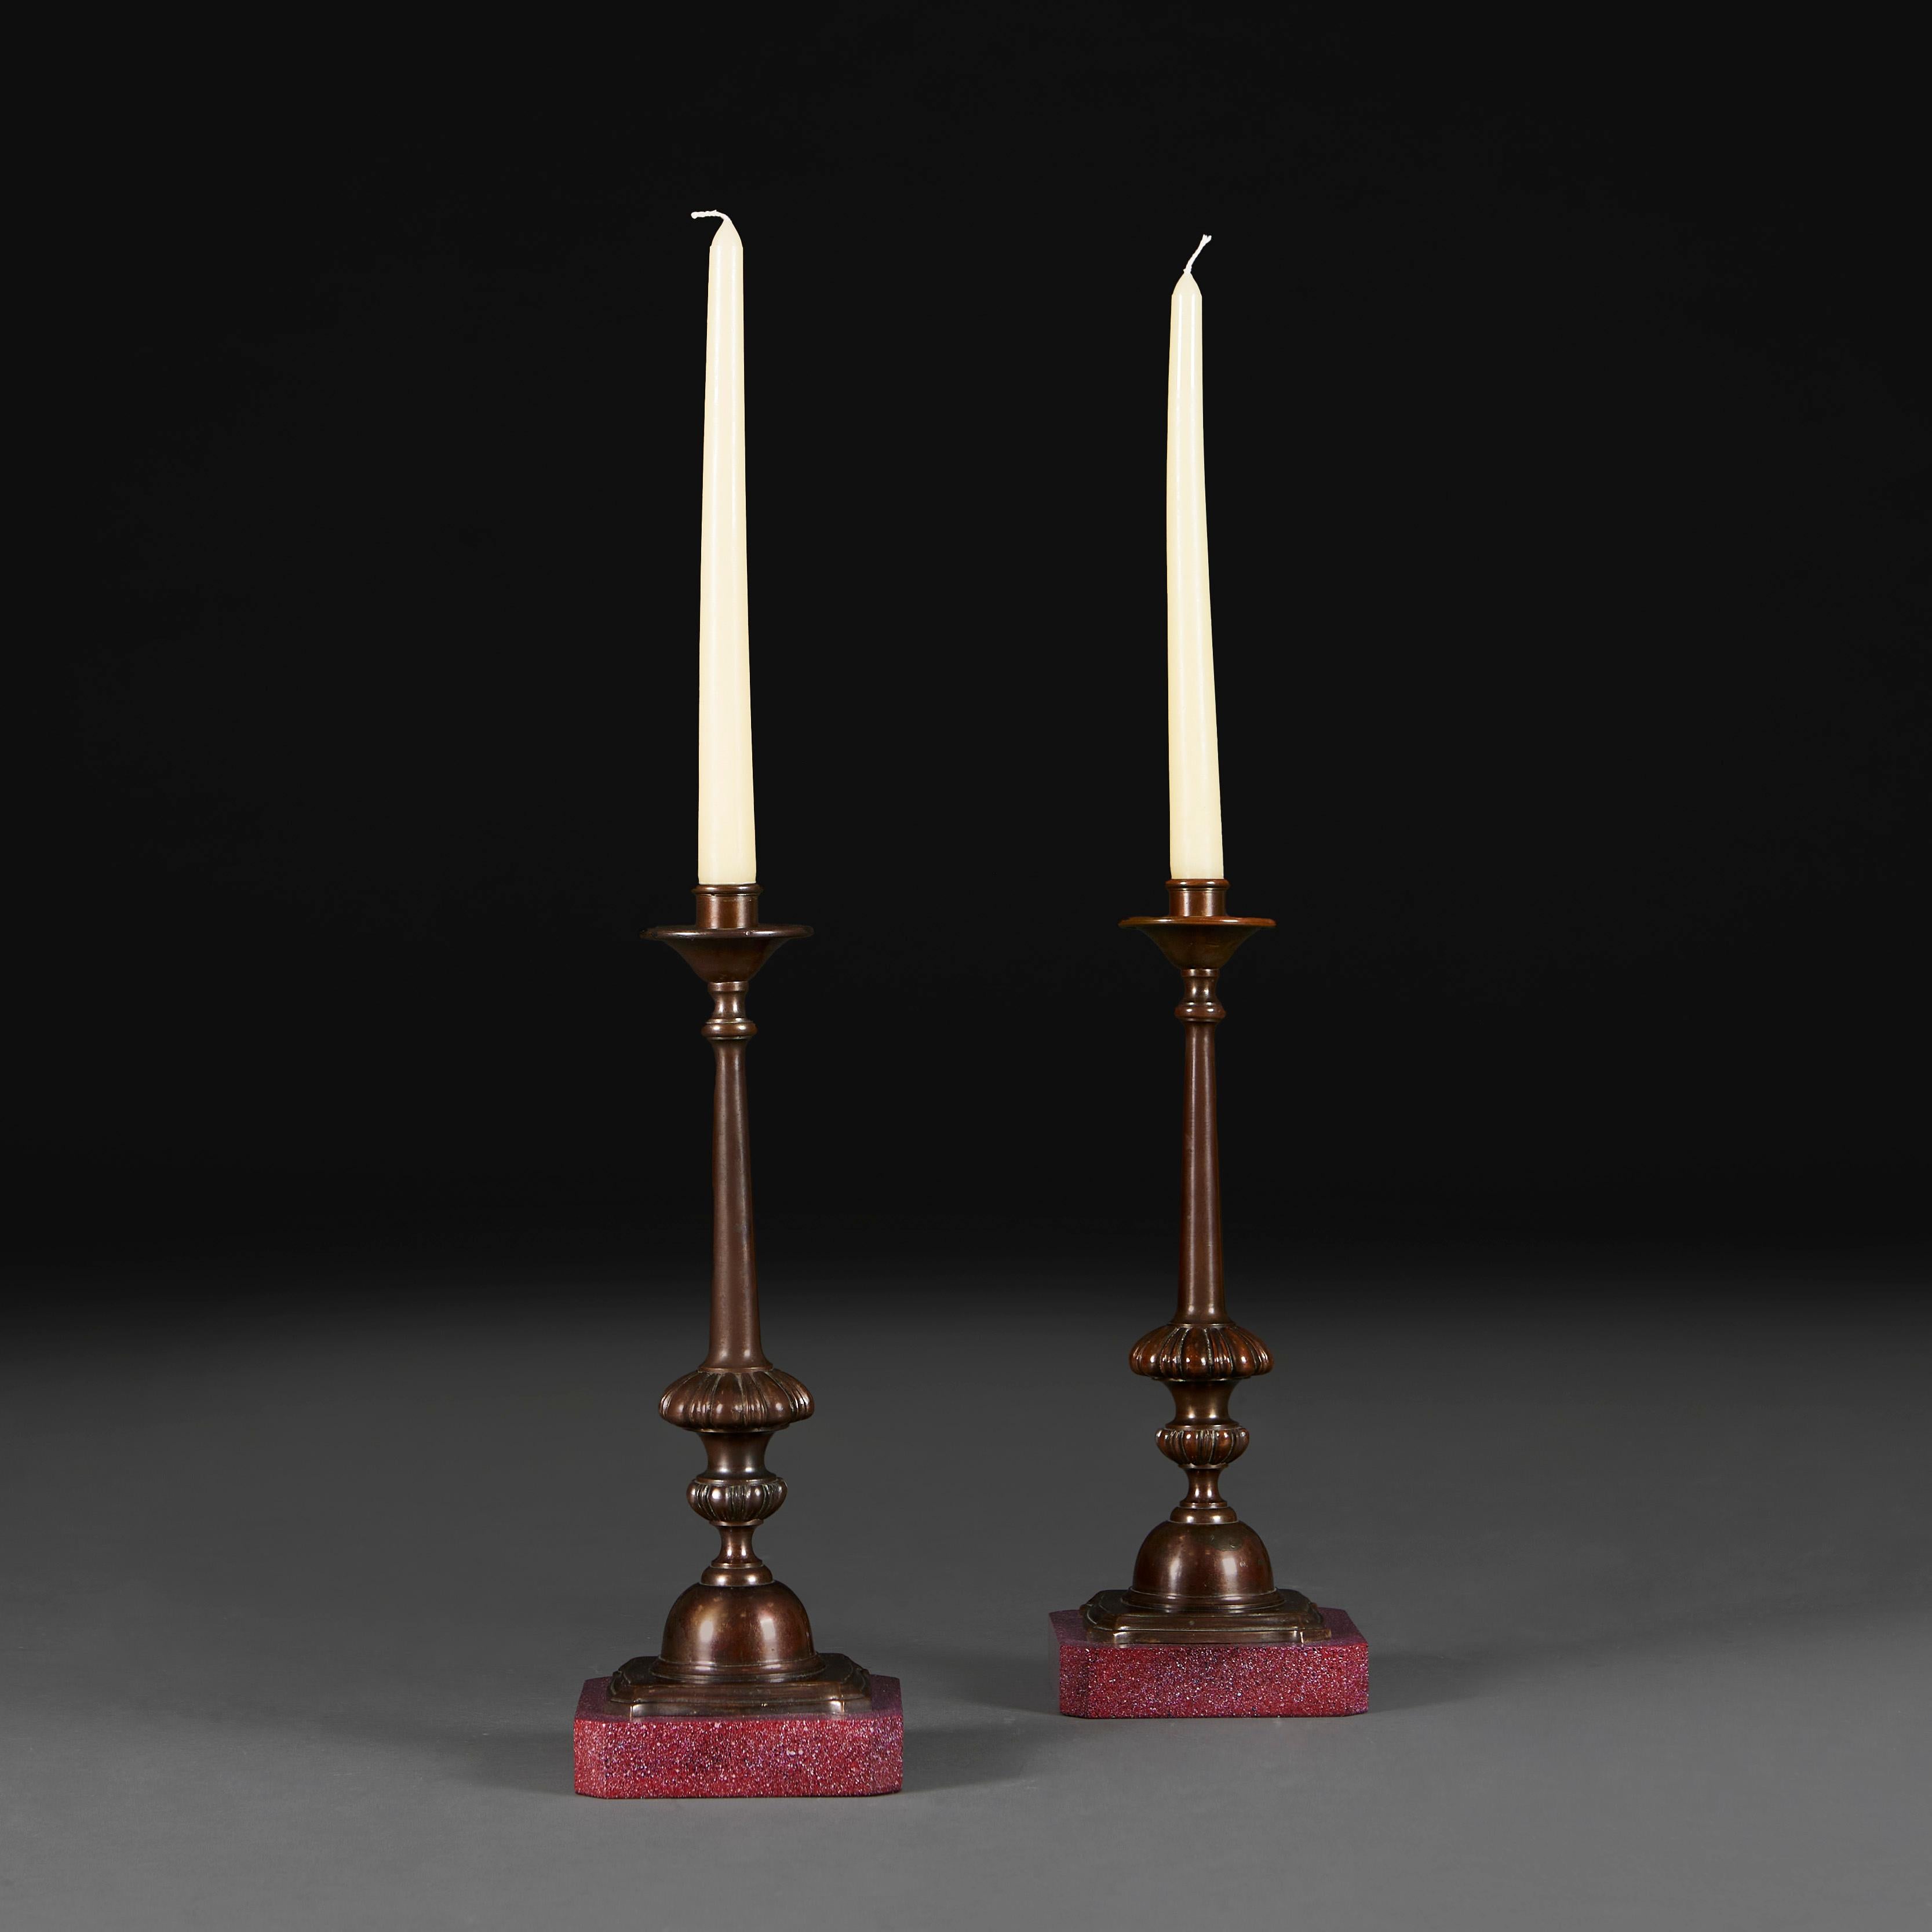 England, circa 1820

A pair of early nineteenth century bronze candlesticks, with tapering stems and urn shaped bases, supported on faux porphyry plinths.

Height 33.00cm

Width 12.00cm